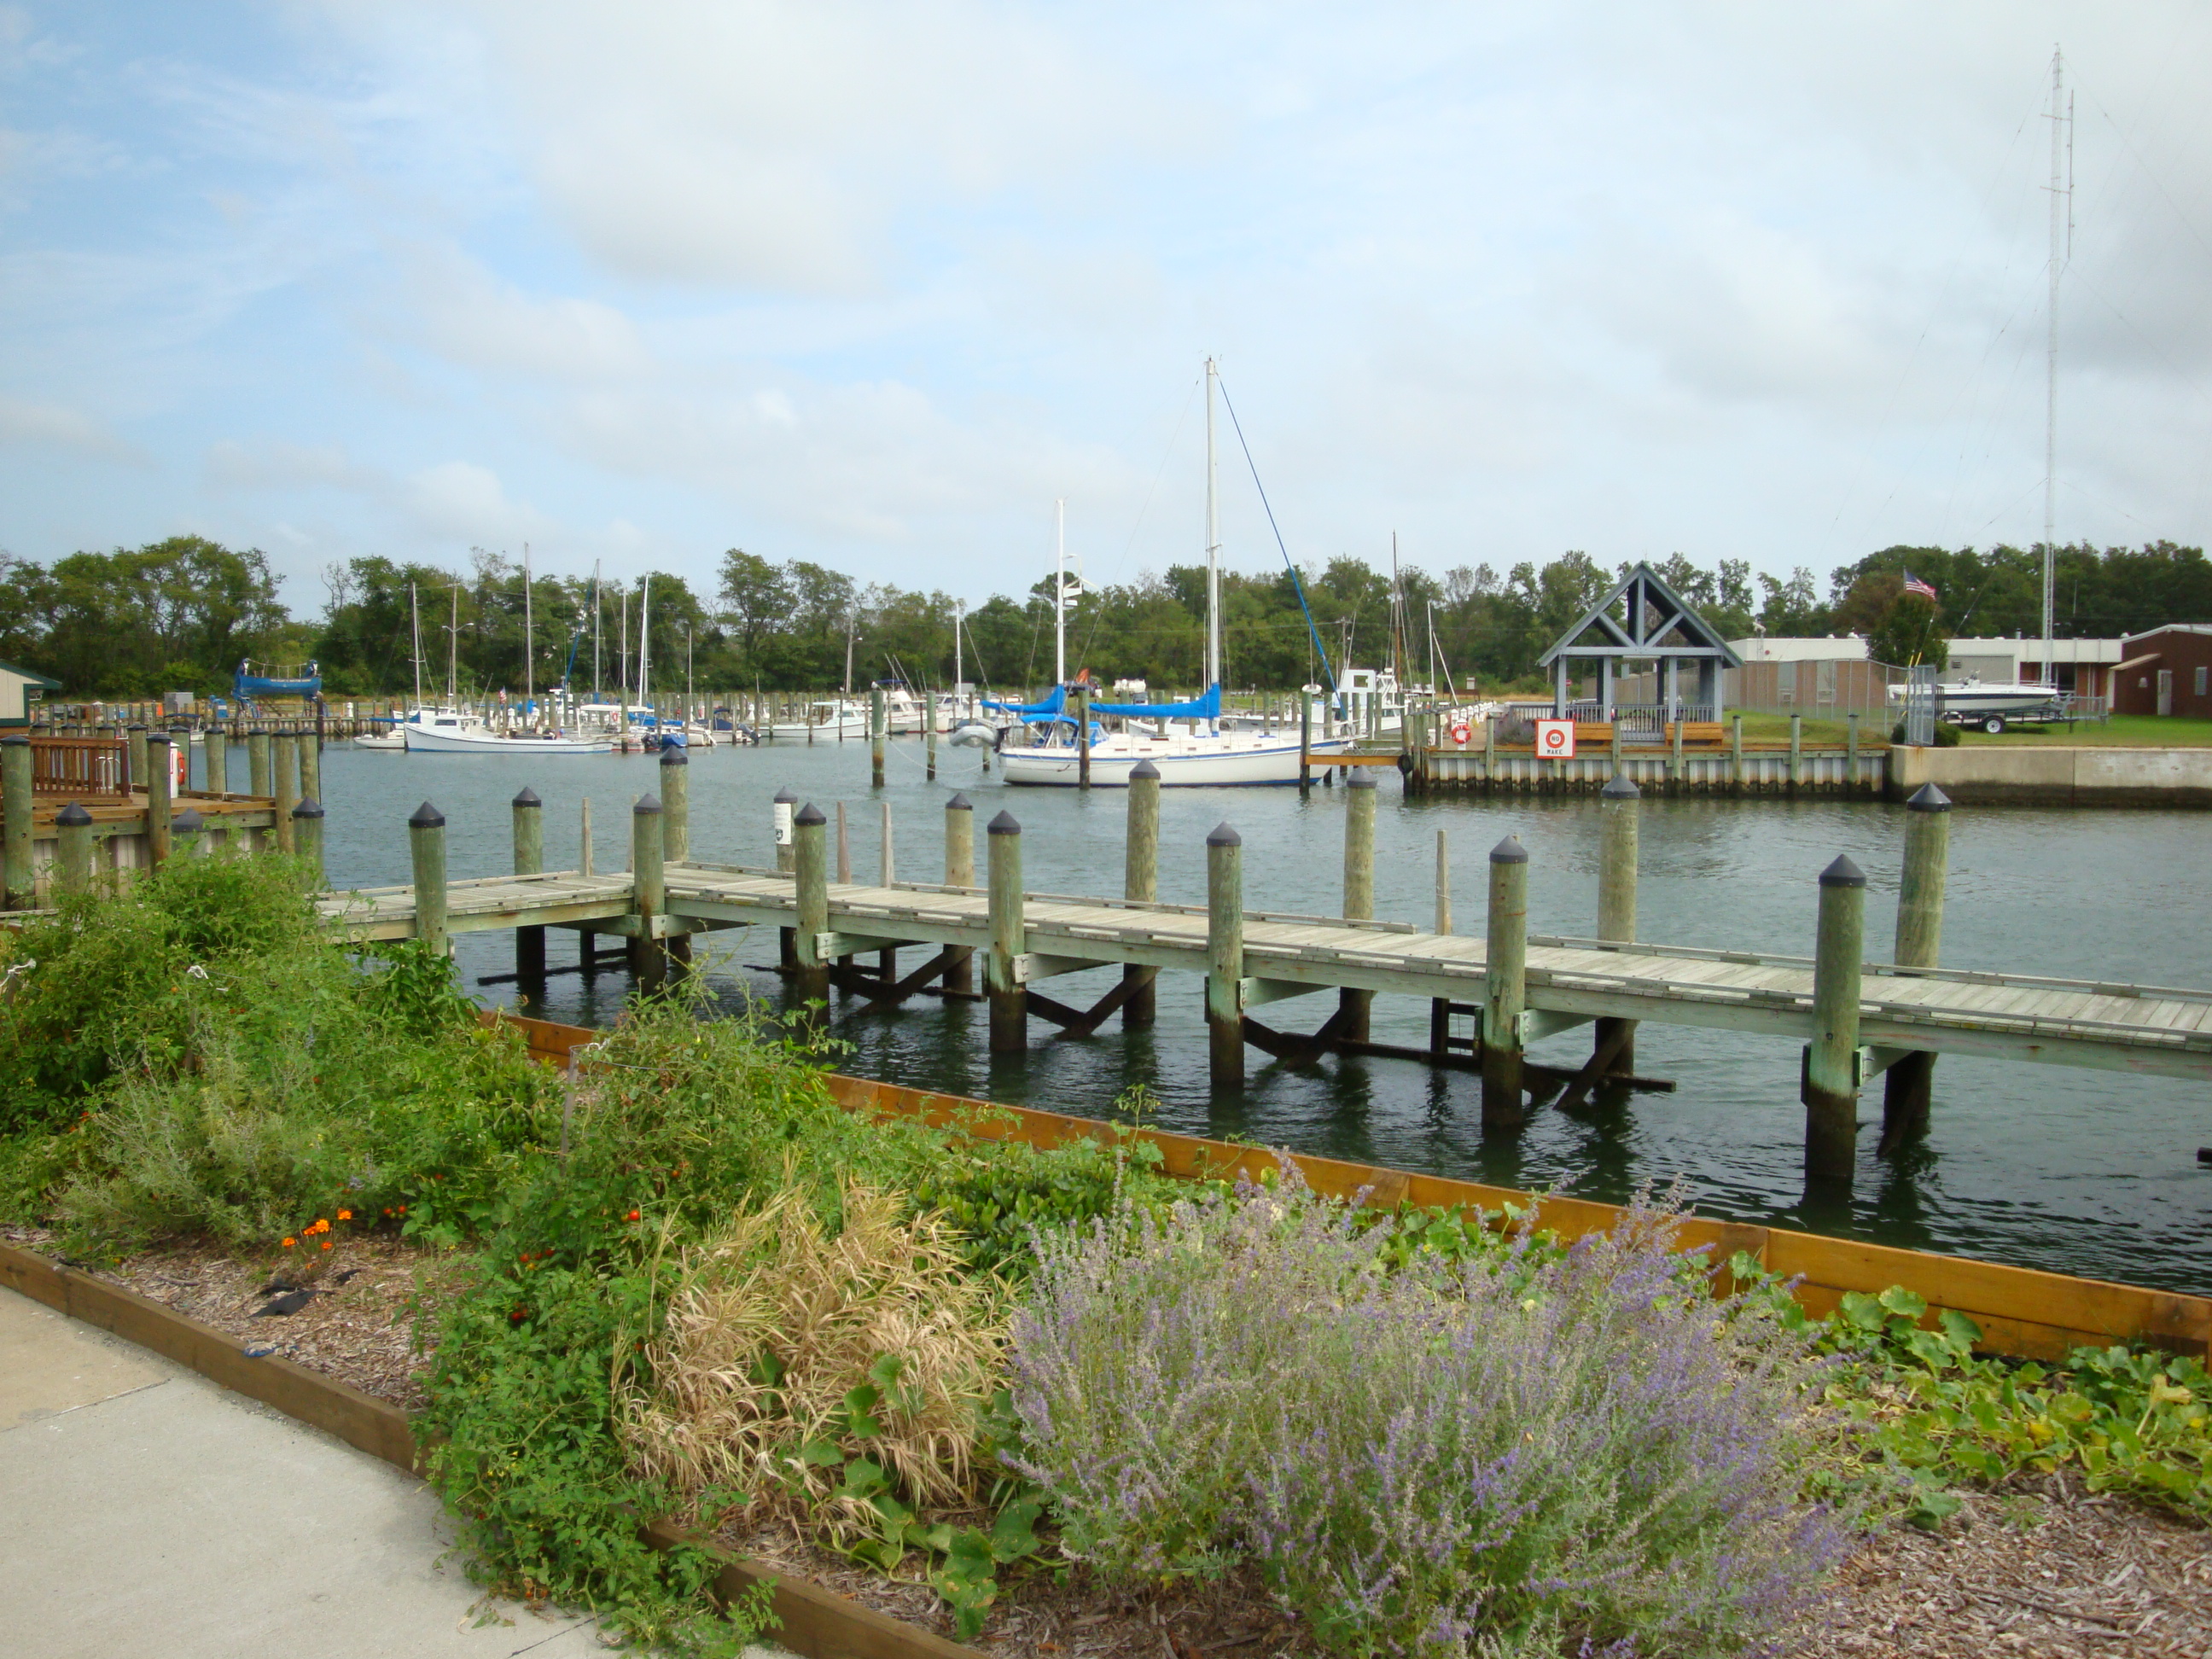 A view of docks and boats in the waterside town of Cape Charles VA